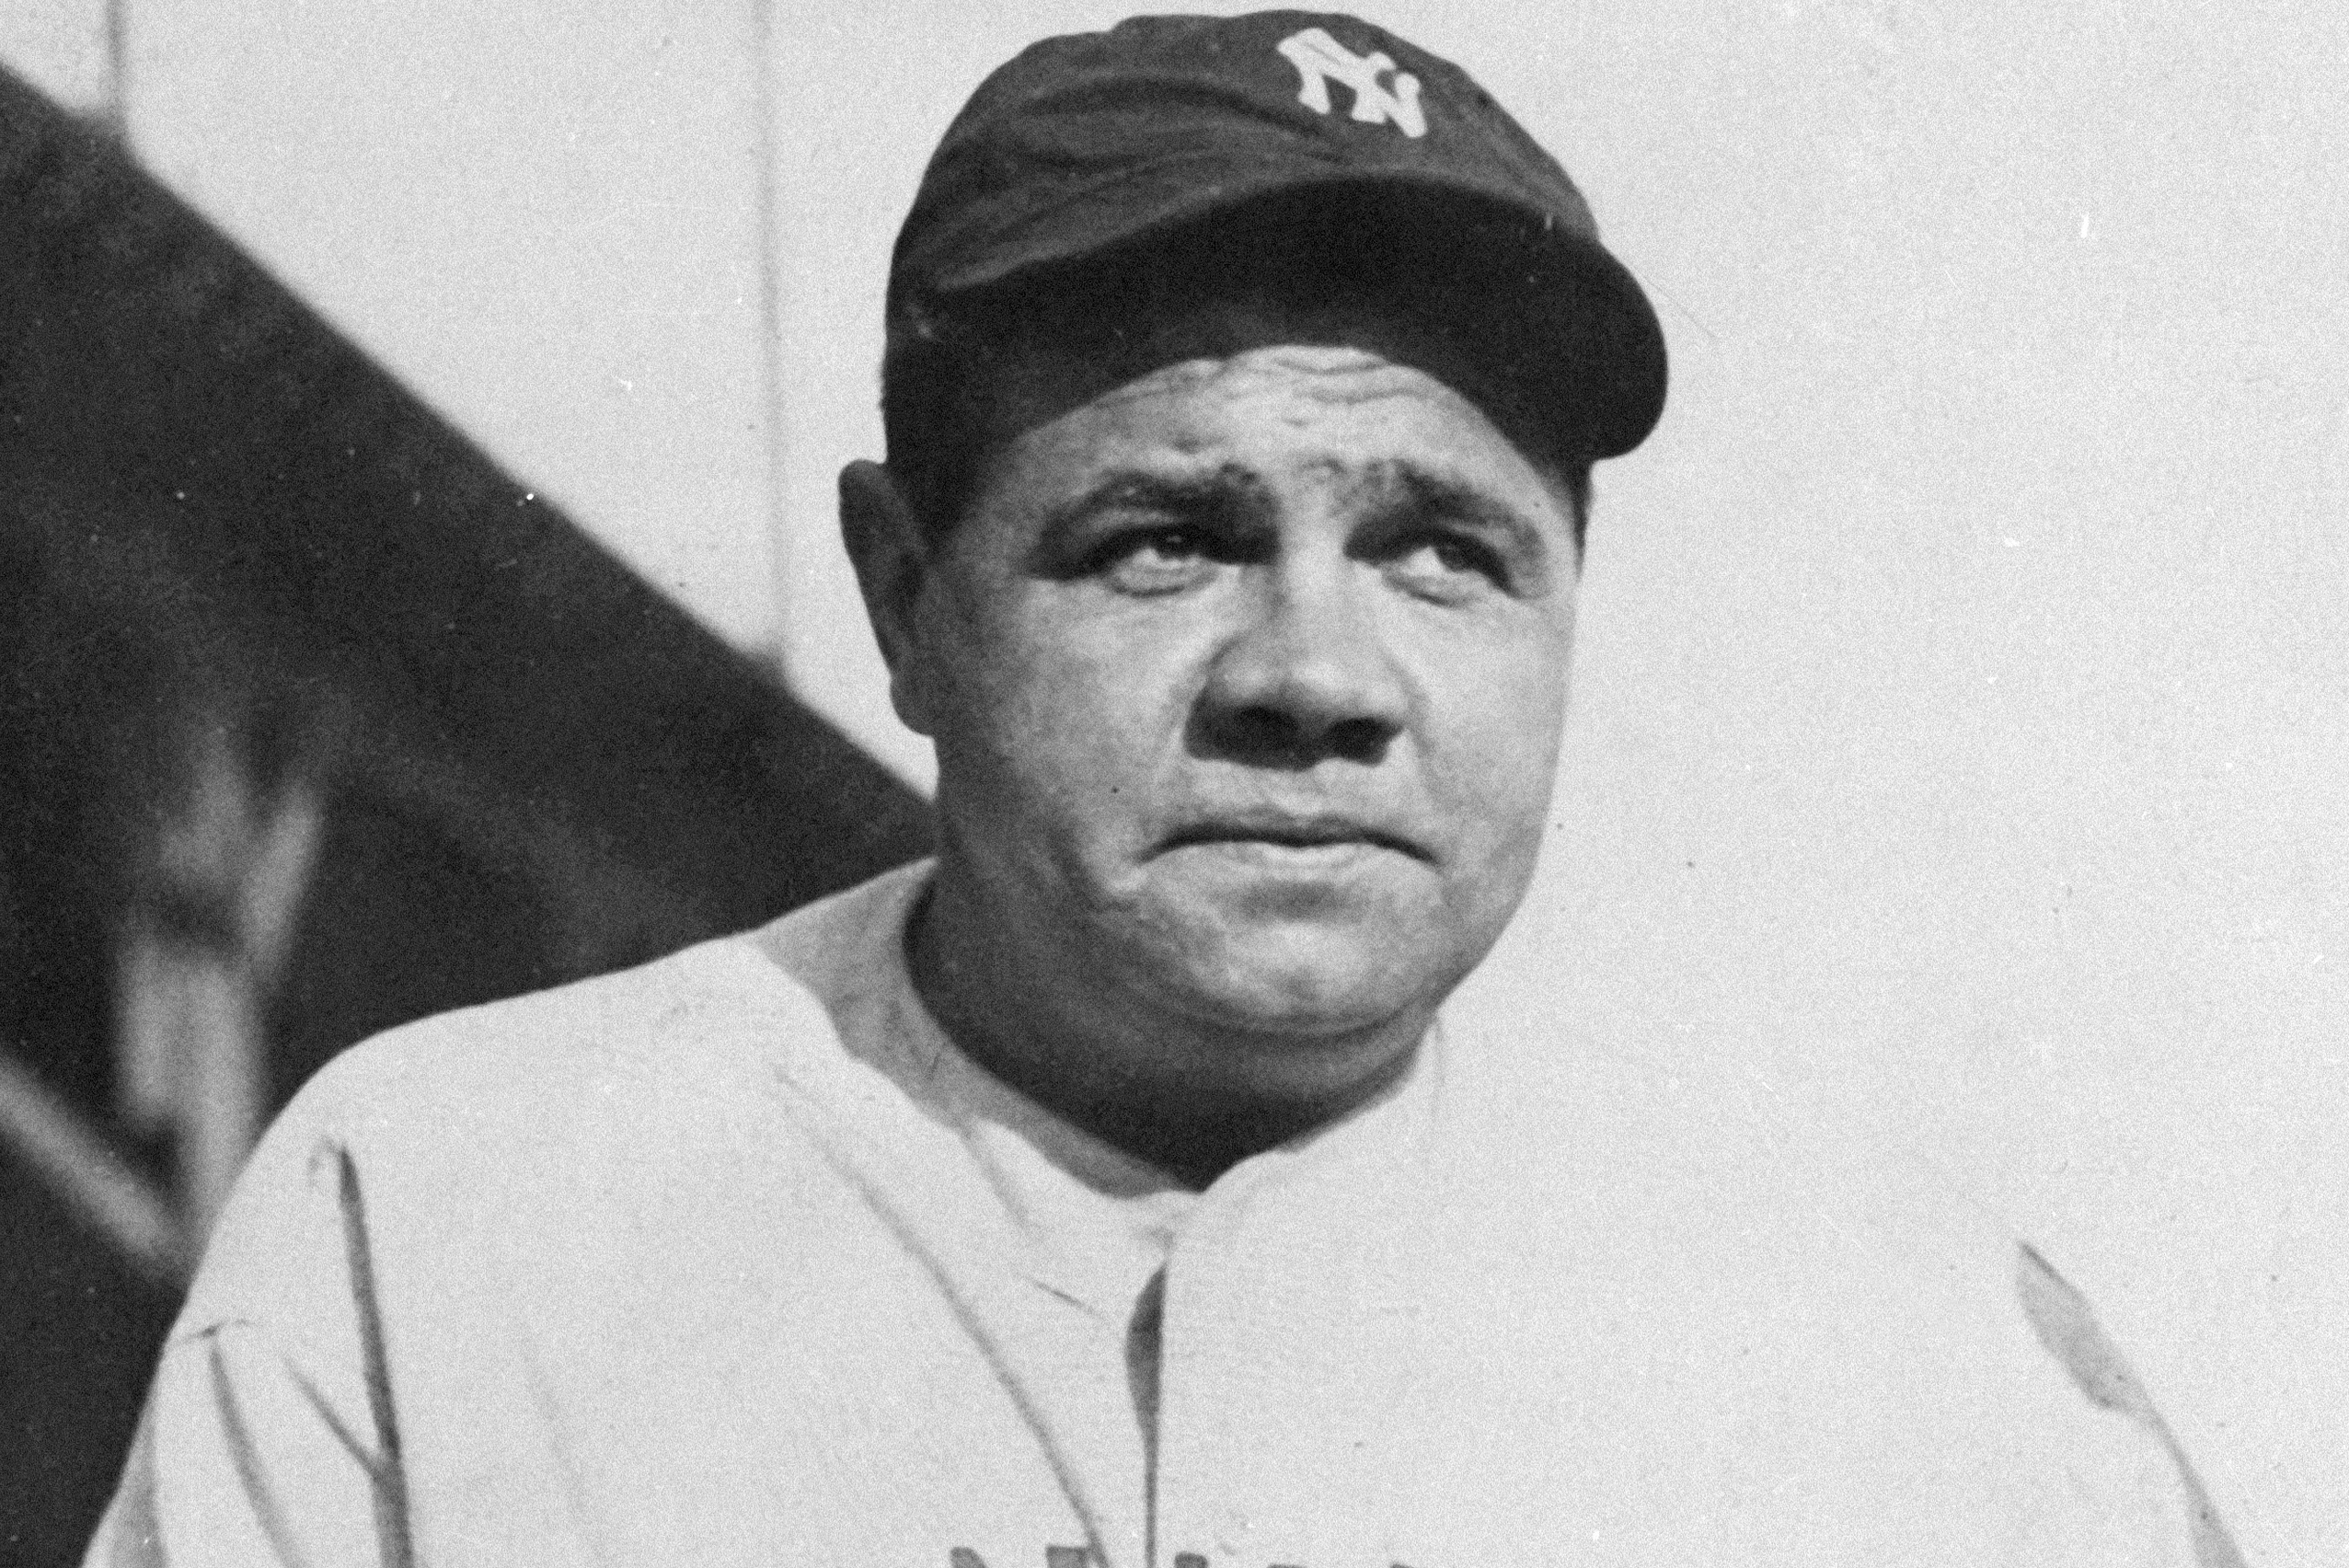 Babe Ruth road jersey sells at auction for $5.64 million – WANE 15